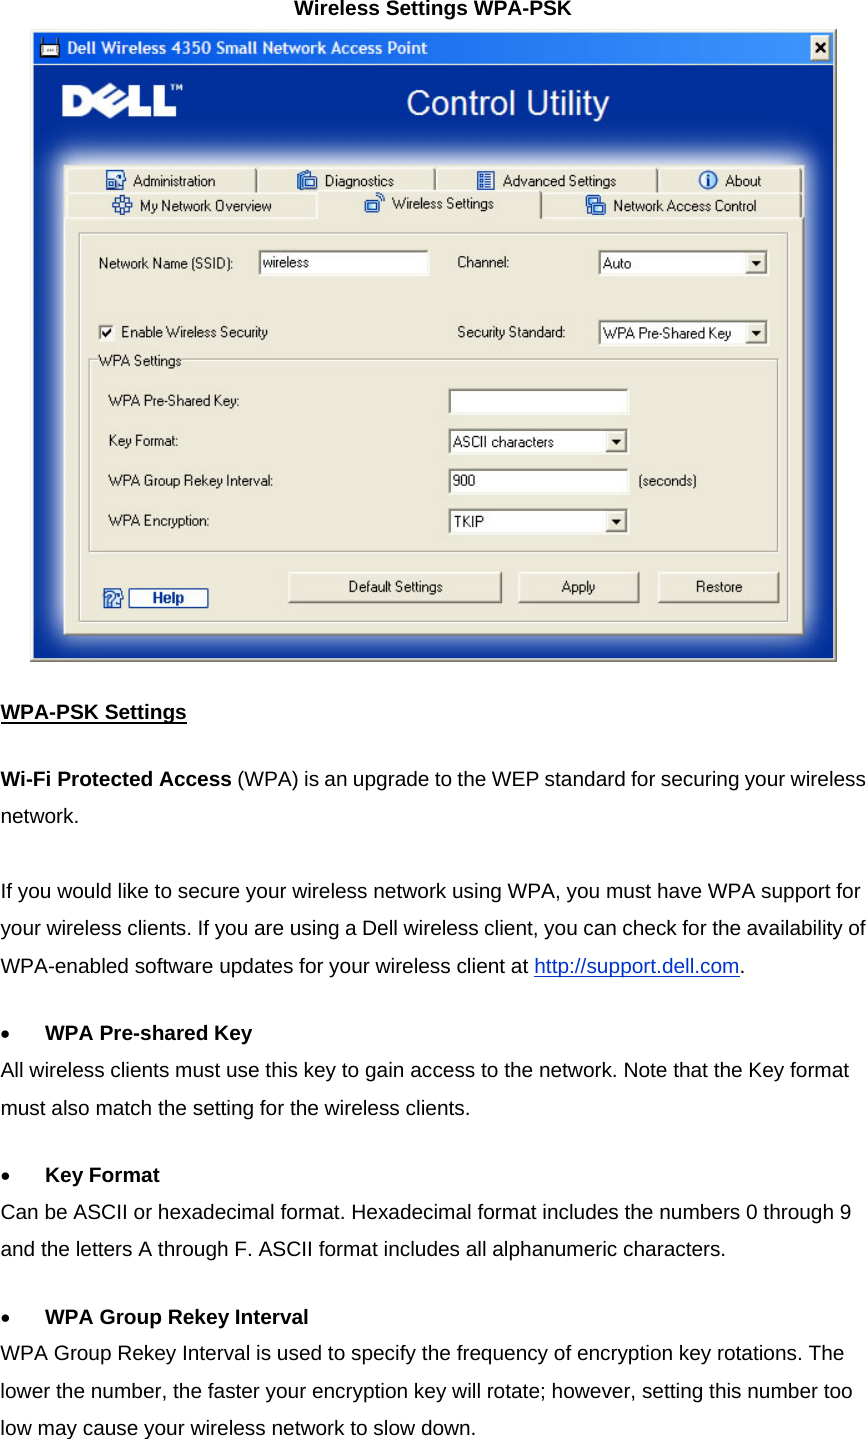 Wireless Settings WPA-PSK  WPA-PSK SettingsWi-Fi Protected Access (WPA) is an upgrade to the WEP standard for securing your wireless network.   If you would like to secure your wireless network using WPA, you must have WPA support for your wireless clients. If you are using a Dell wireless client, you can check for the availability of WPA-enabled software updates for your wireless client at http://support.dell.com. •          WPA Pre-shared Key All wireless clients must use this key to gain access to the network. Note that the Key format must also match the setting for the wireless clients. •          Key Format Can be ASCII or hexadecimal format. Hexadecimal format includes the numbers 0 through 9 and the letters A through F. ASCII format includes all alphanumeric characters. •          WPA Group Rekey Interval WPA Group Rekey Interval is used to specify the frequency of encryption key rotations. The lower the number, the faster your encryption key will rotate; however, setting this number too low may cause your wireless network to slow down. 